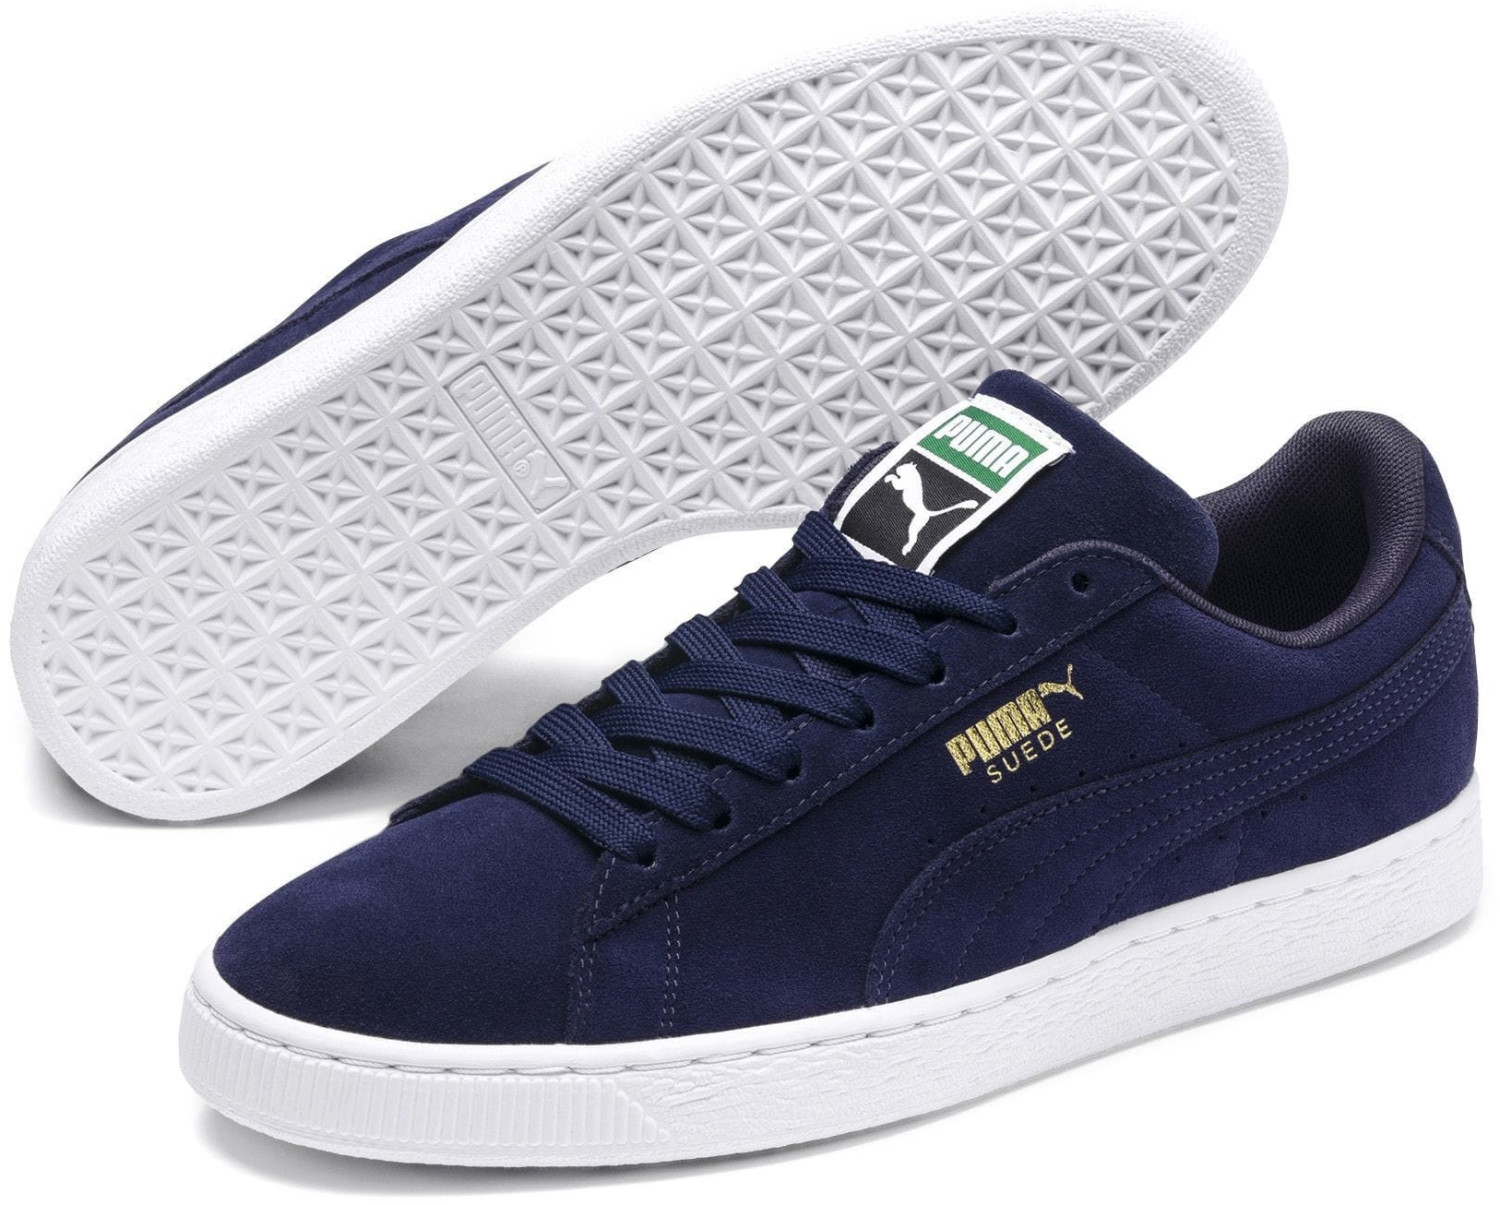 Buy Puma Suede Classic + Peacoat/Peacoat/White from £21.79 (Today ...